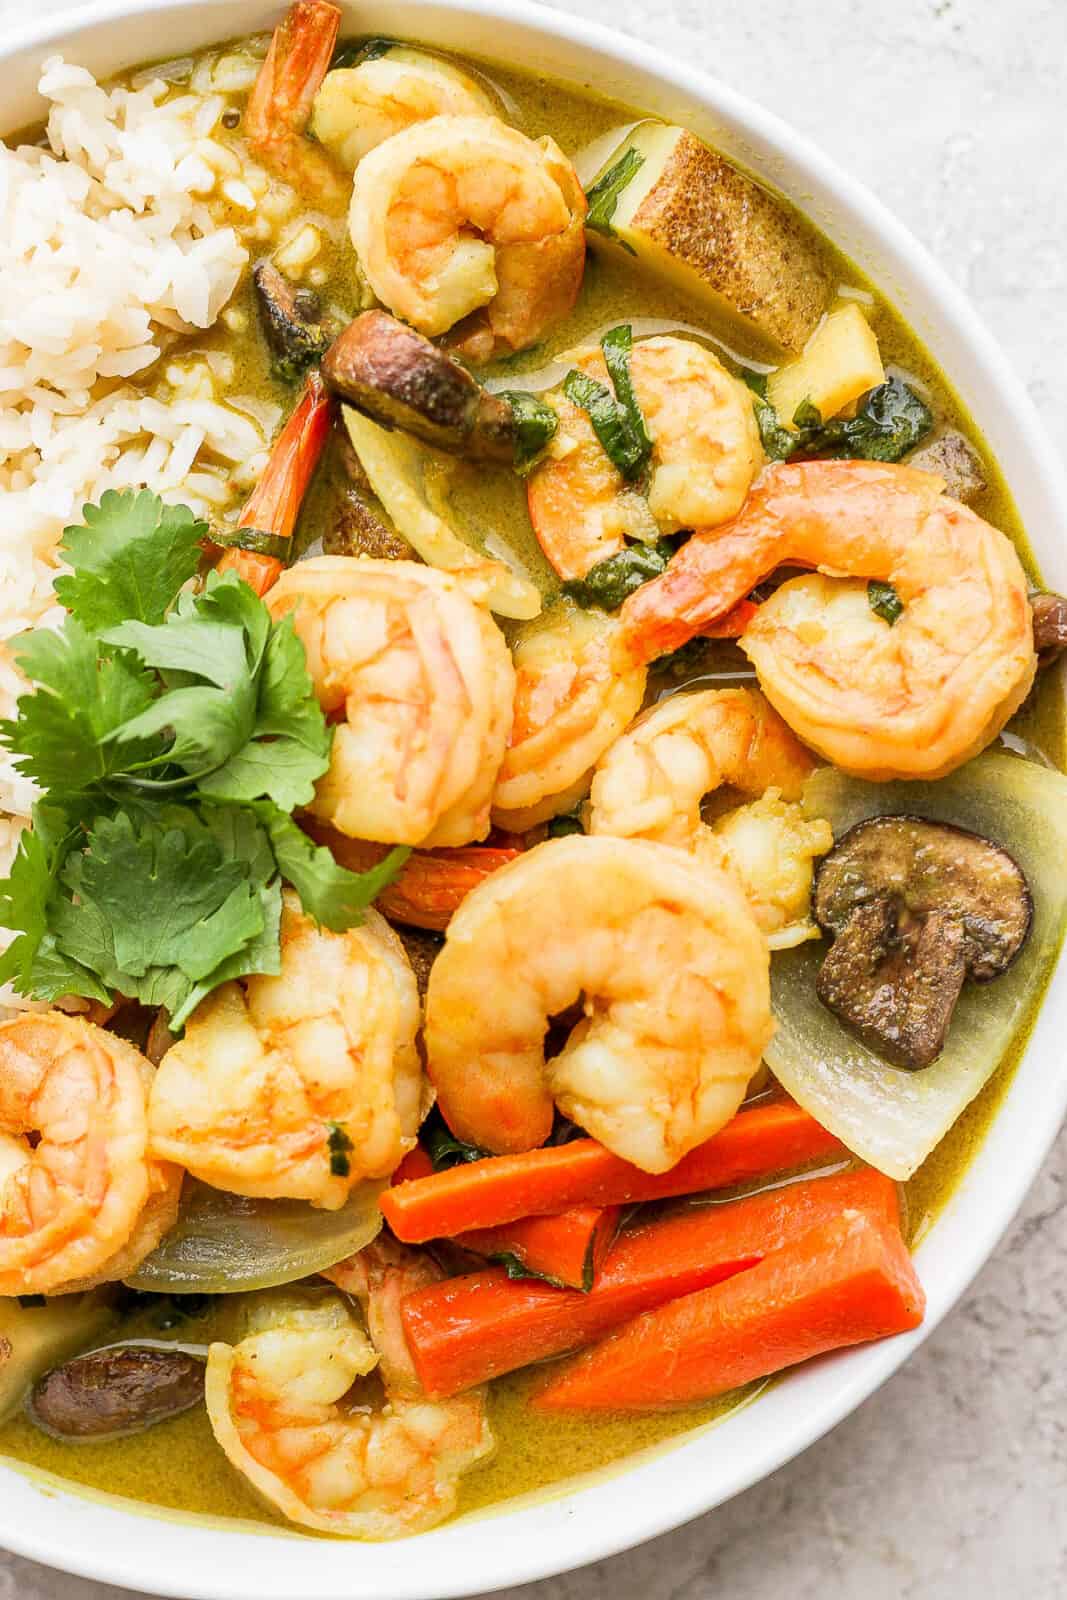 Shrimp curry in a bowl.